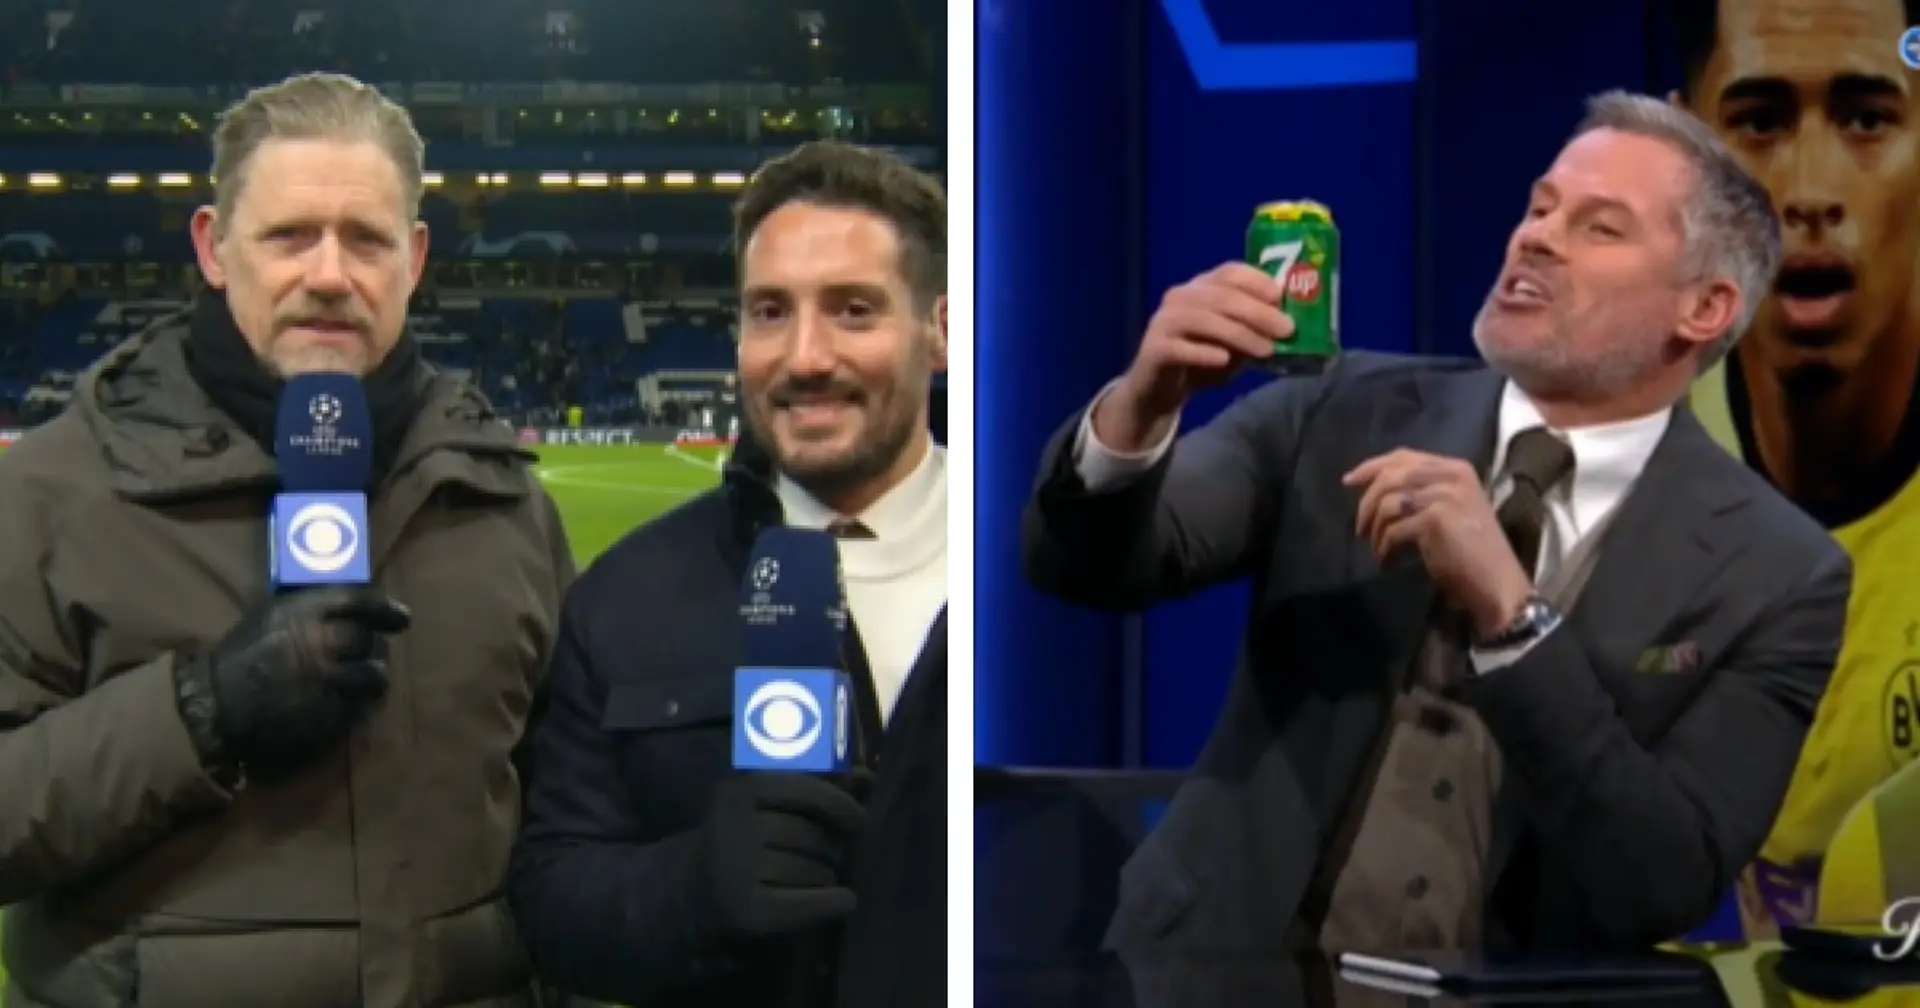 'It's actually Seven Hag': Carragher mocks Man United legend Schmeichel with string of seven-themed jokes